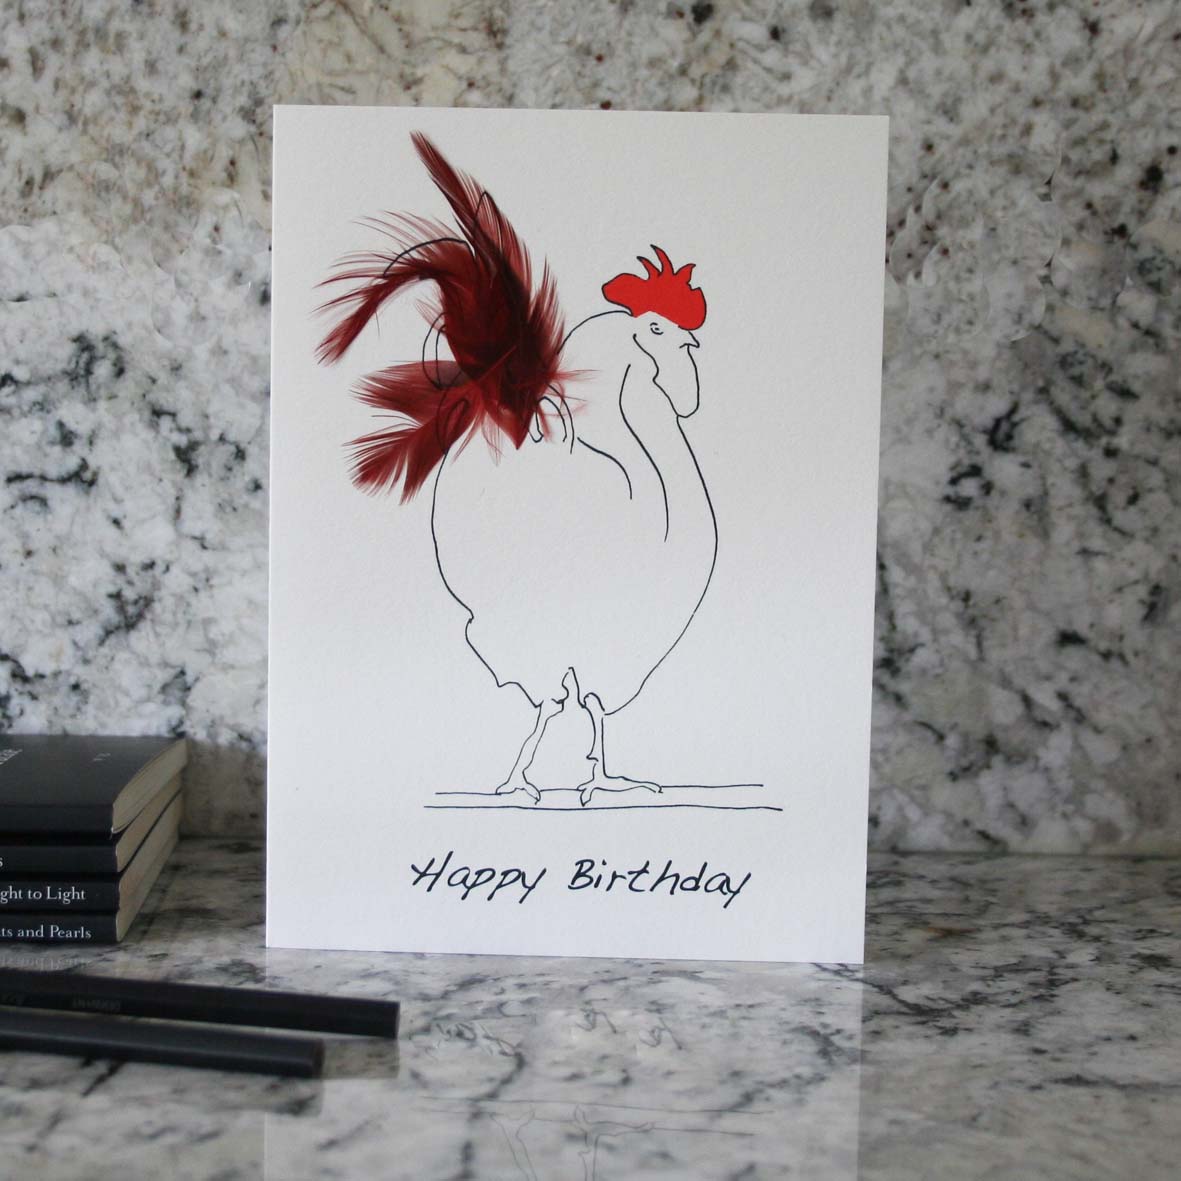 Herk Cockerel happy birthday card with red feathers